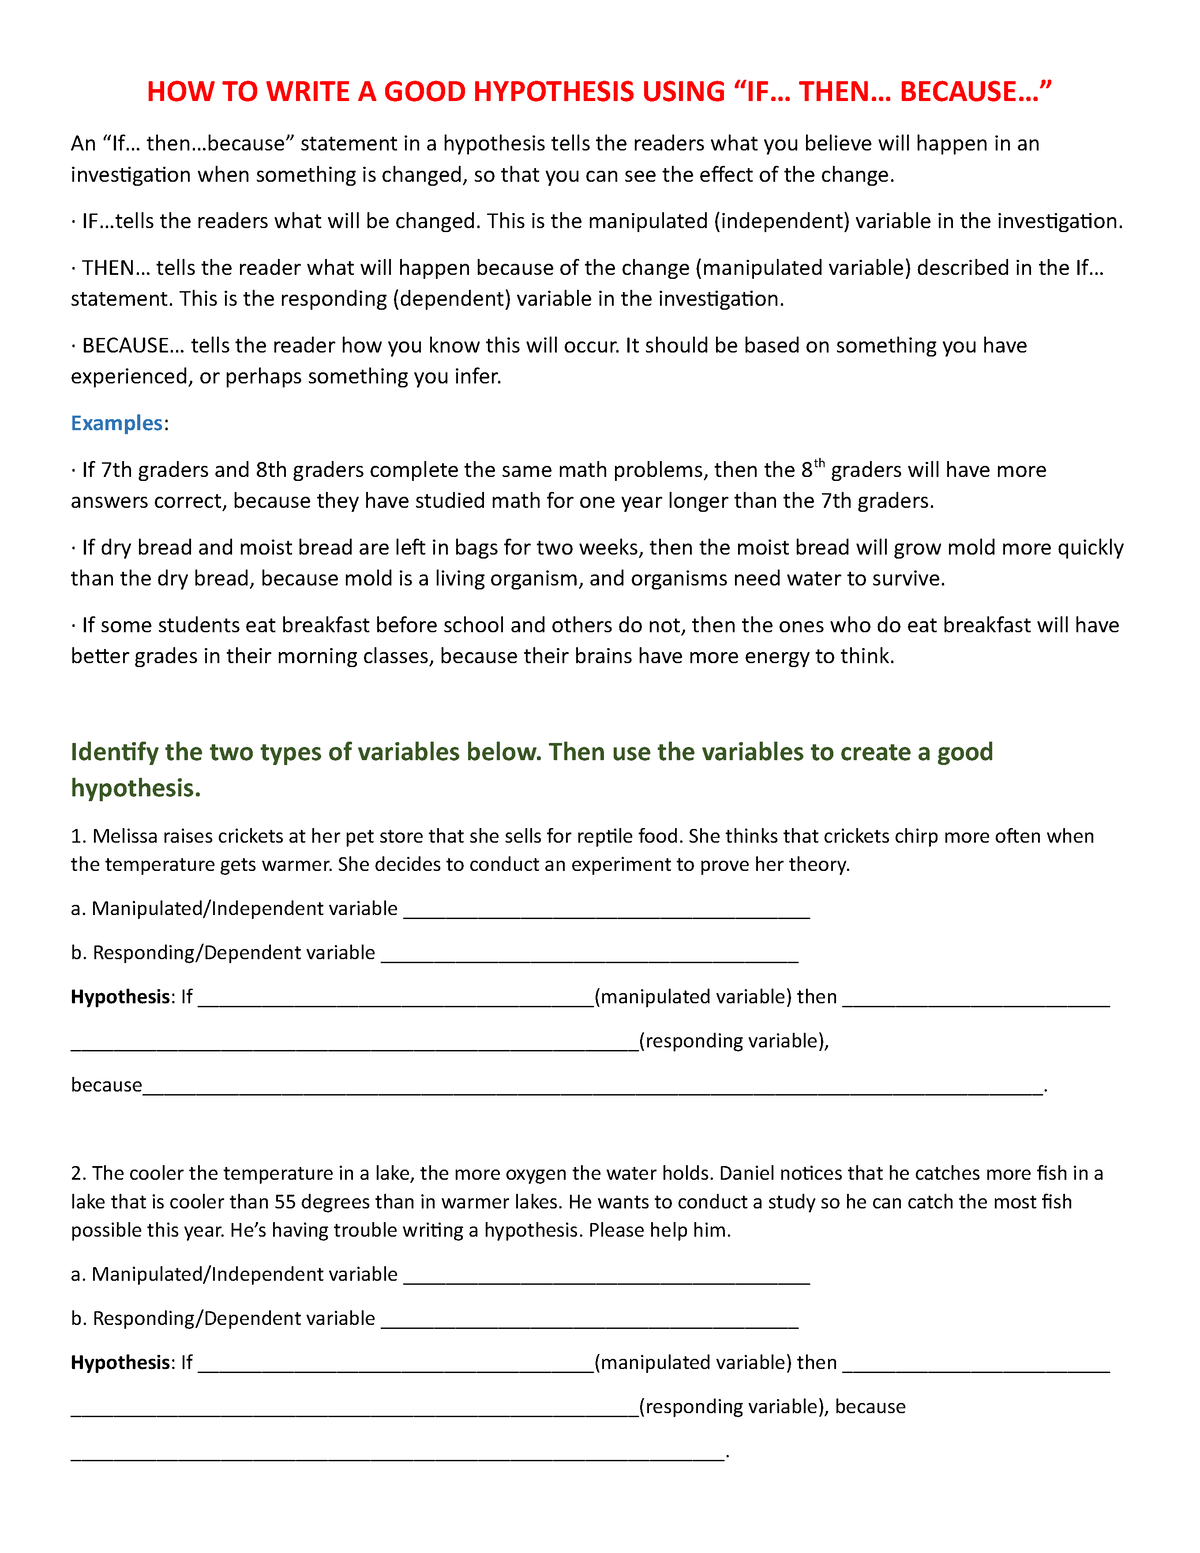 how to write a good hypothesis worksheet answer key